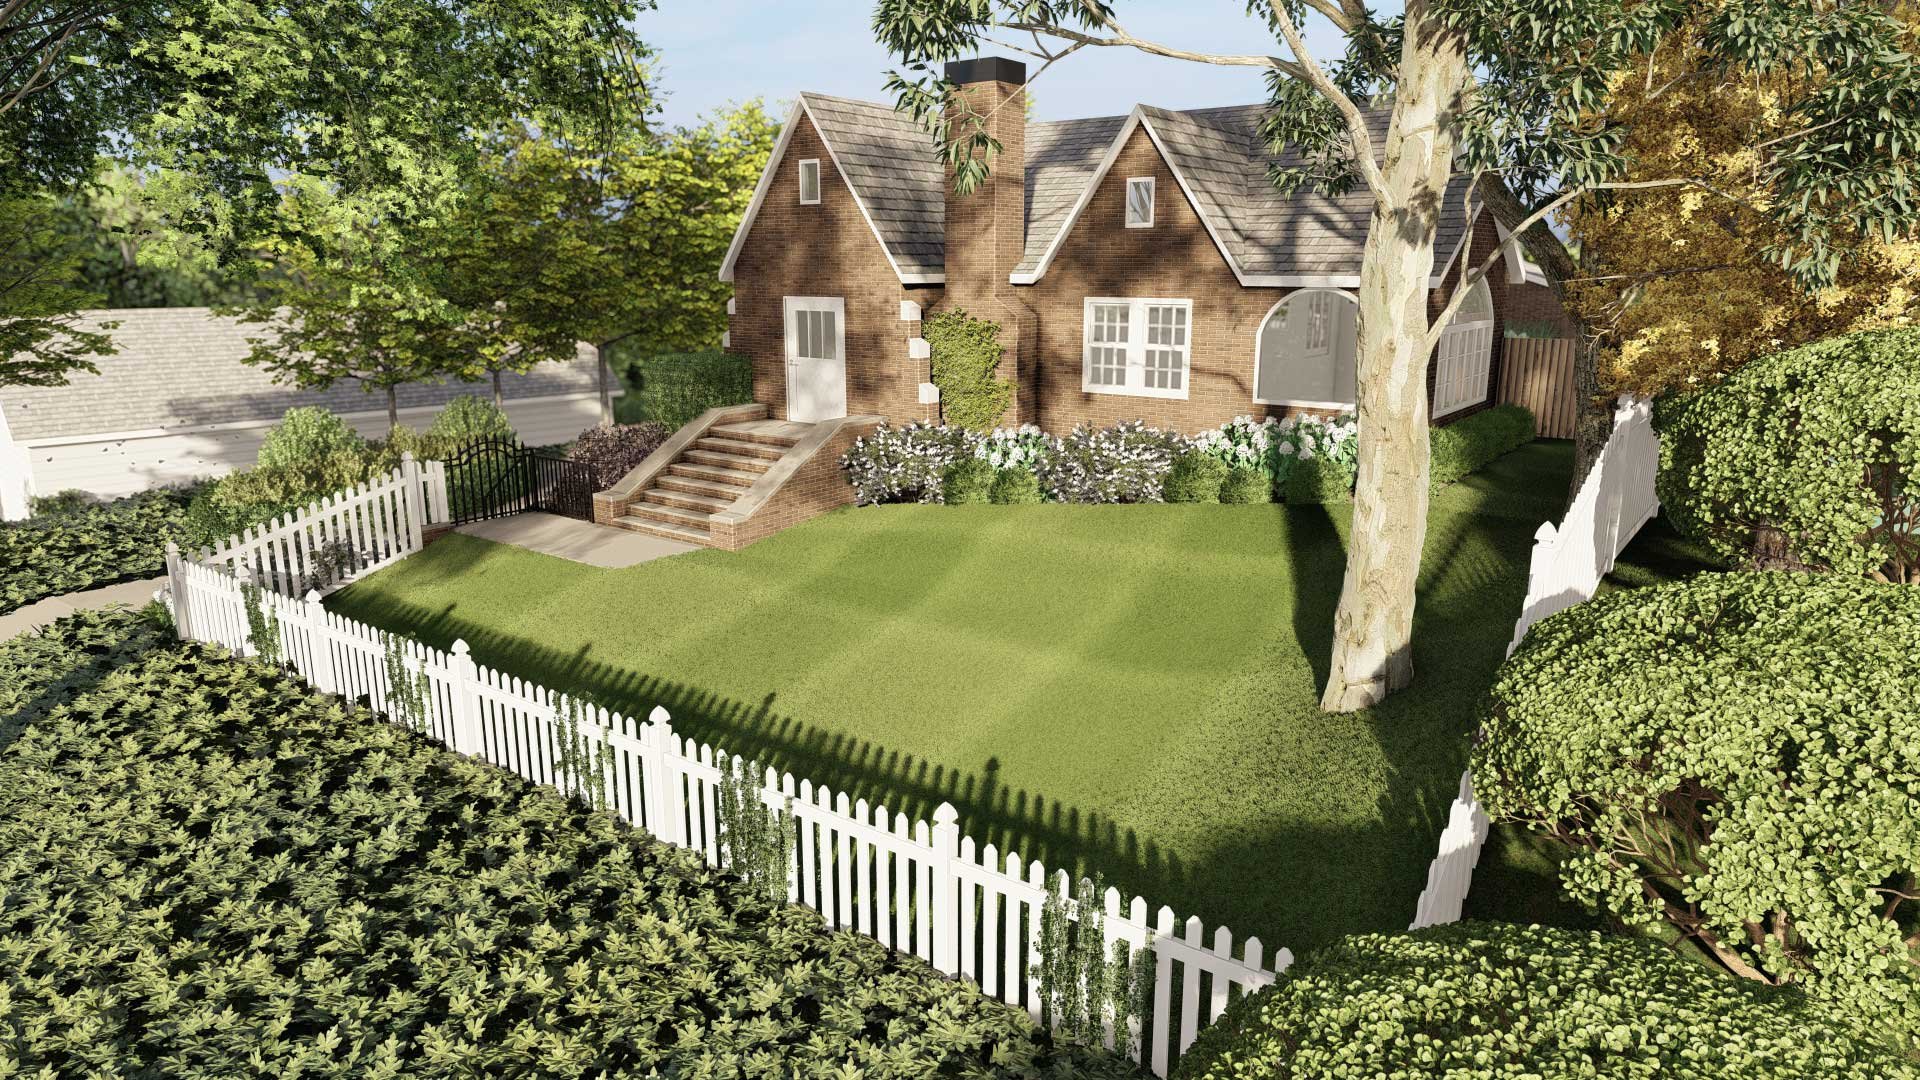 A sloped front yard covered with lawn grass, short fence next to plants and trees